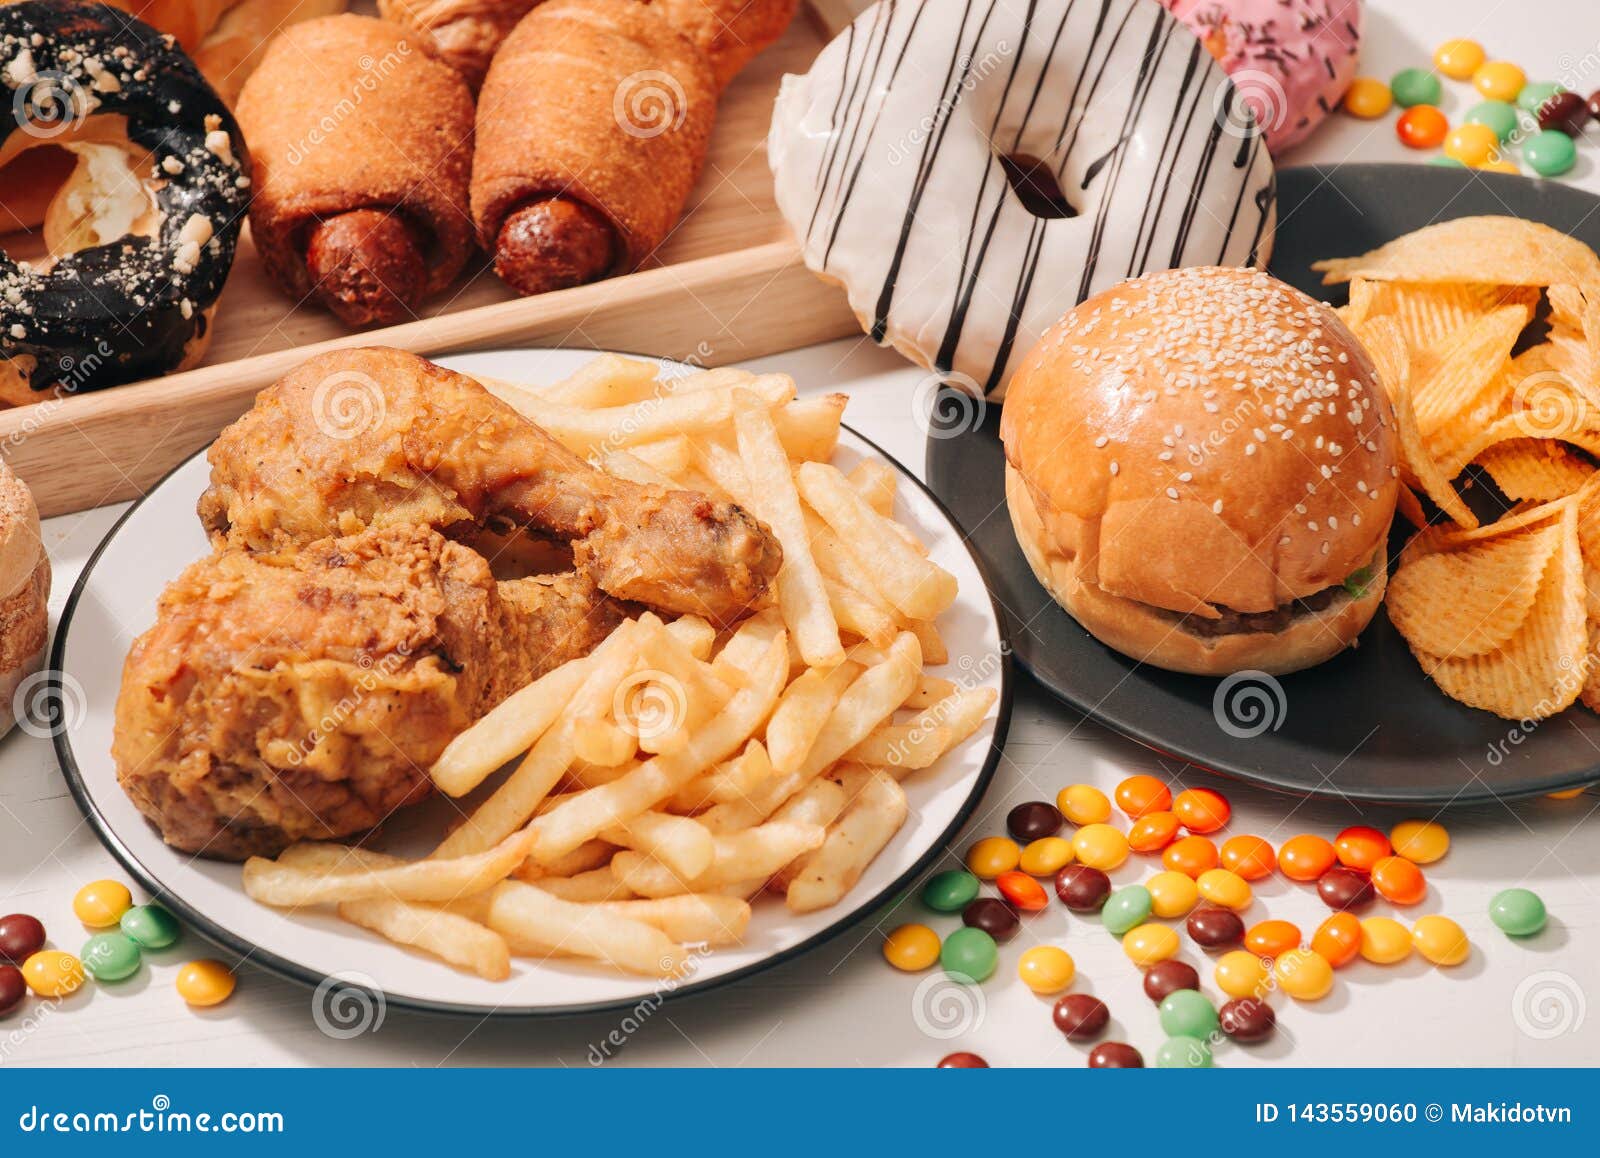 Fast Food Snacks Stock Images Download 10951 Royalty Free Photos